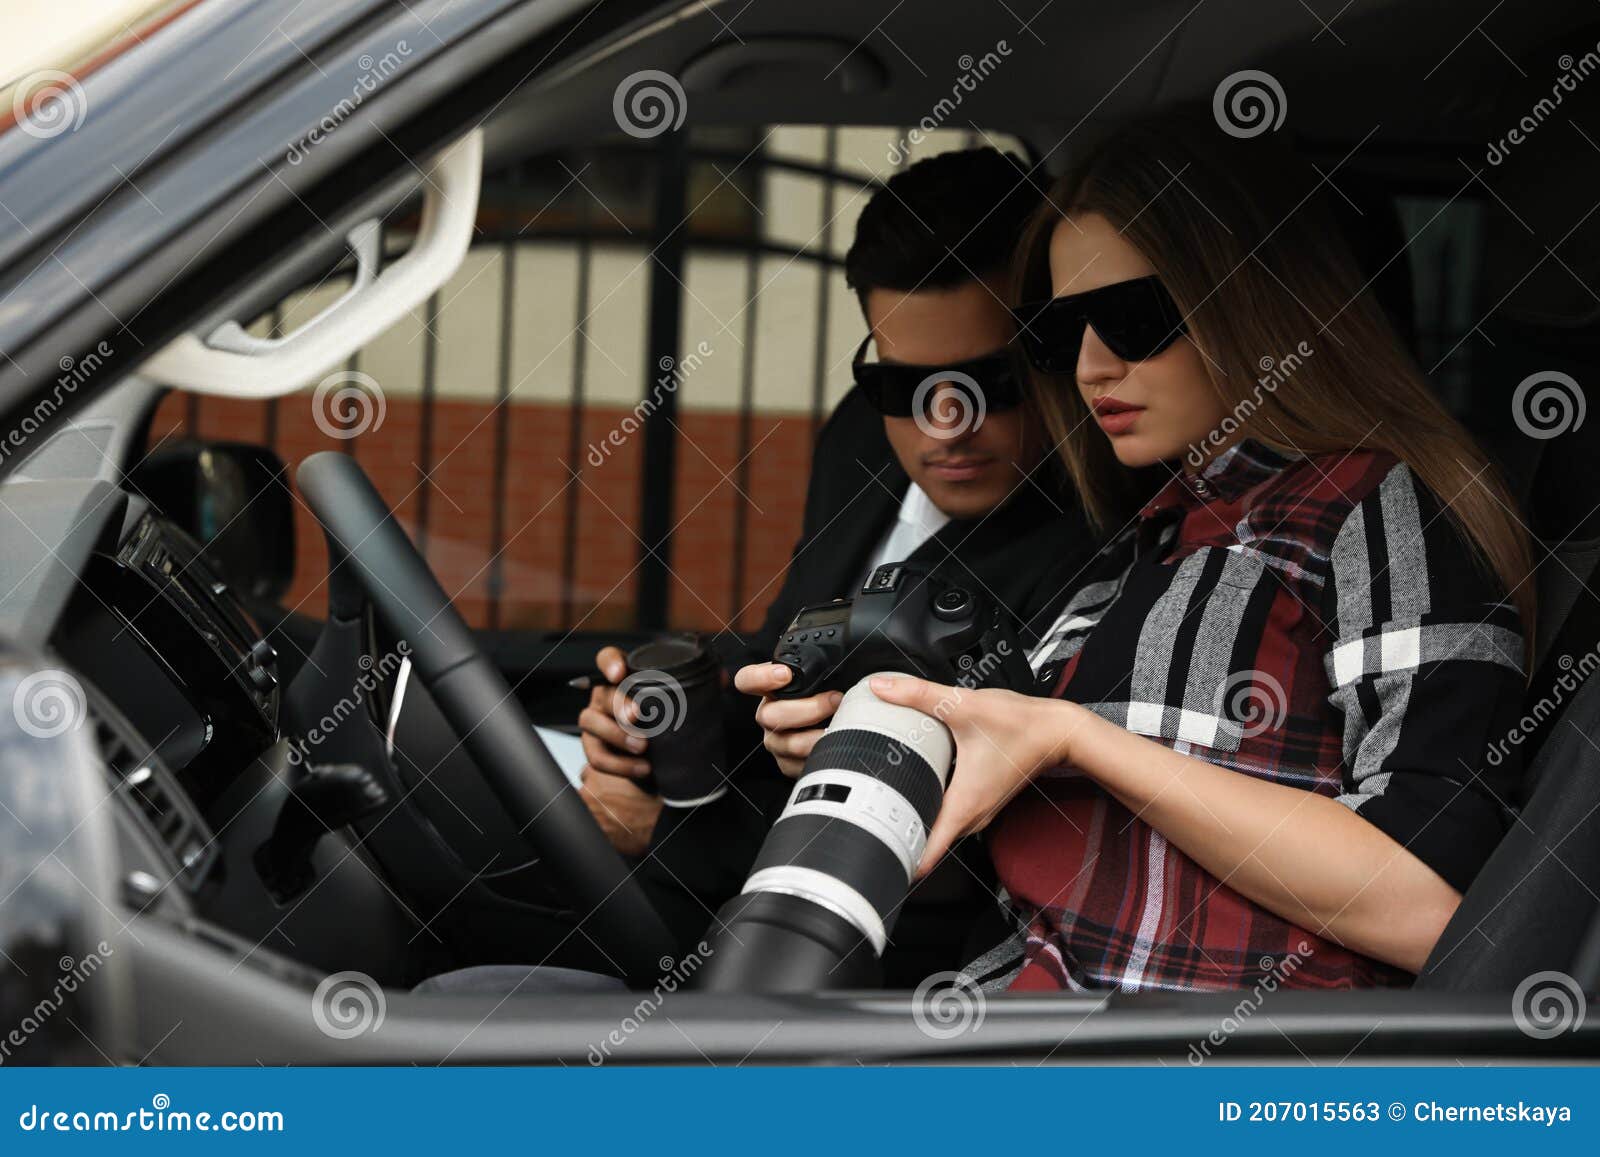 private detectives with modern camera spying from car